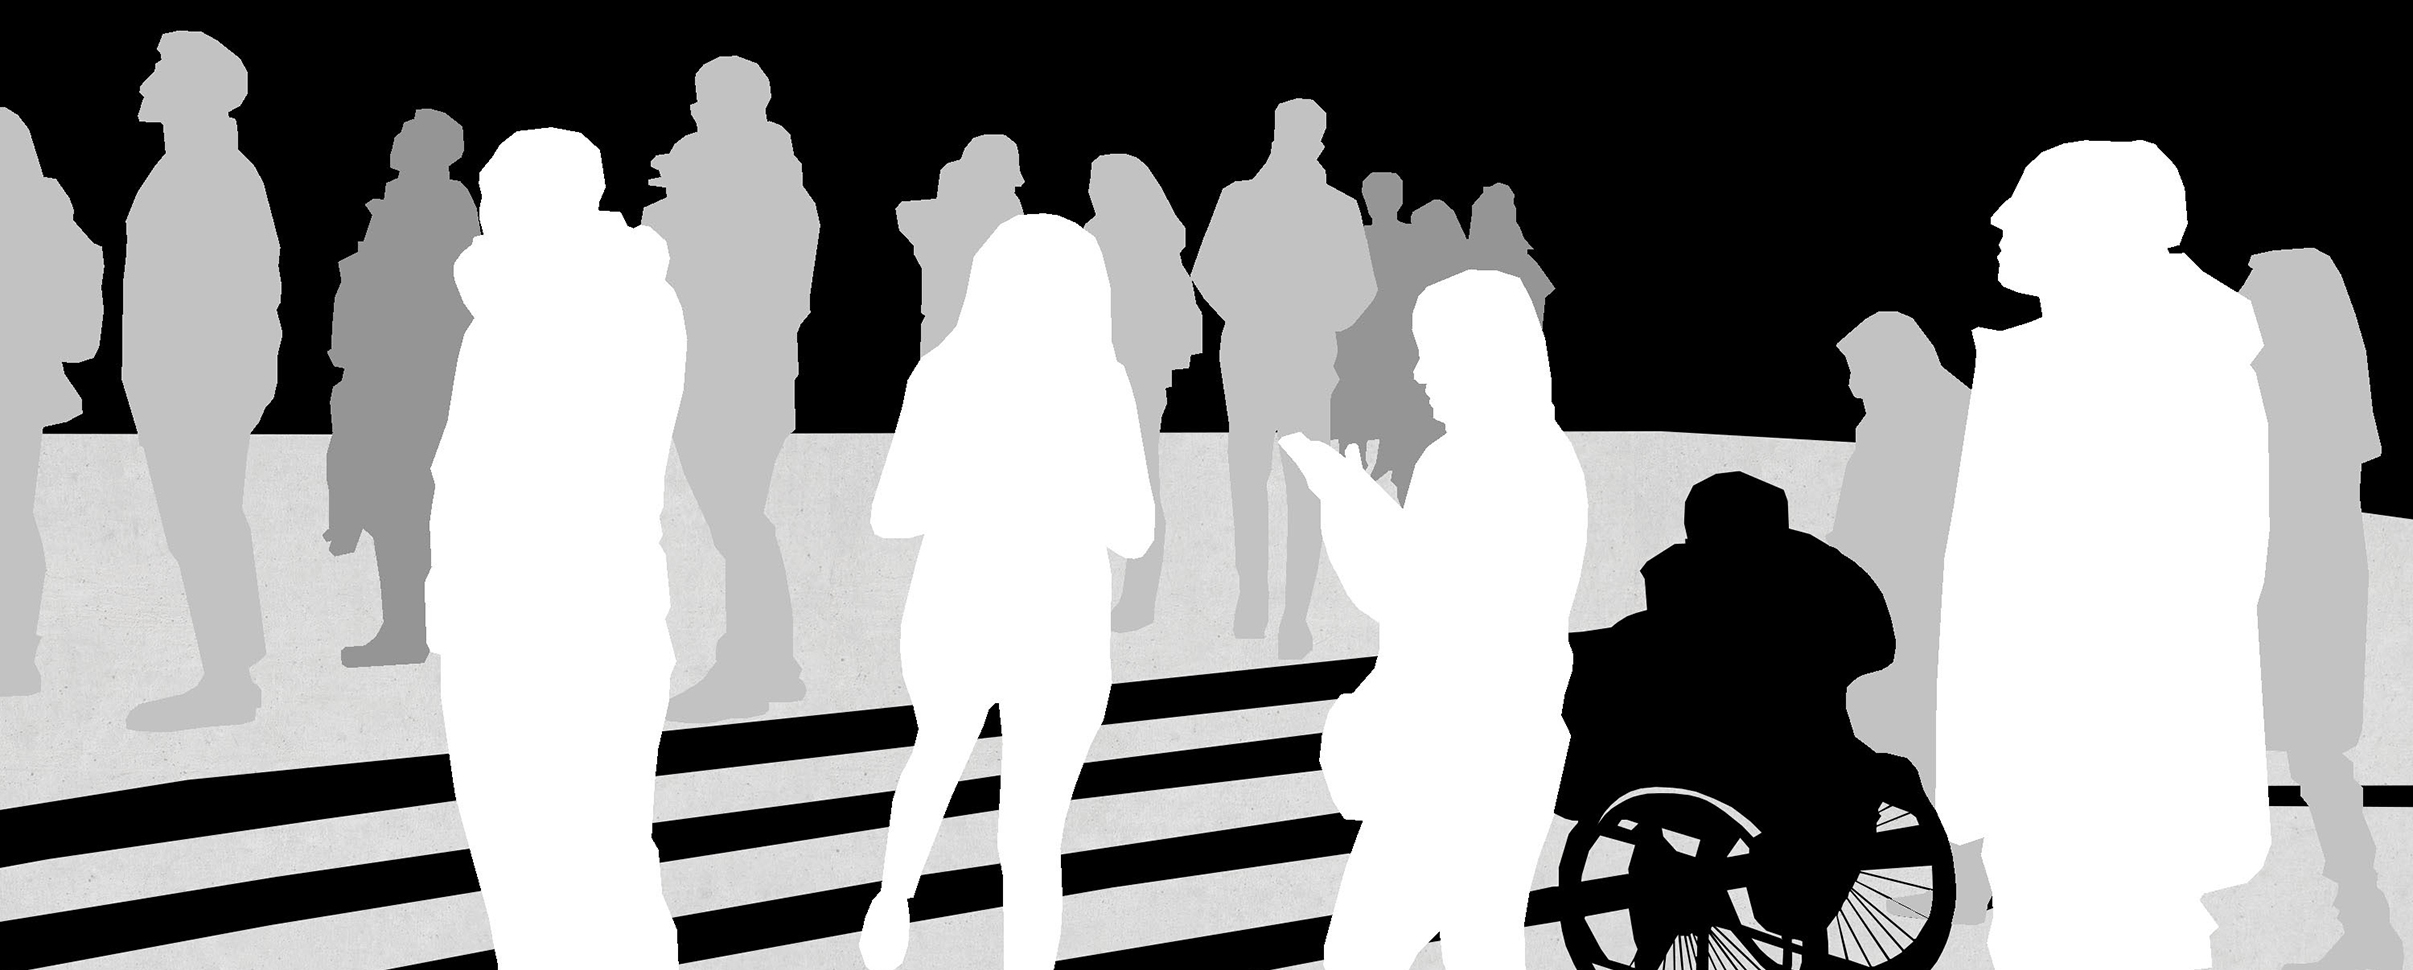 Black and while model of stairs, people in silhouette 